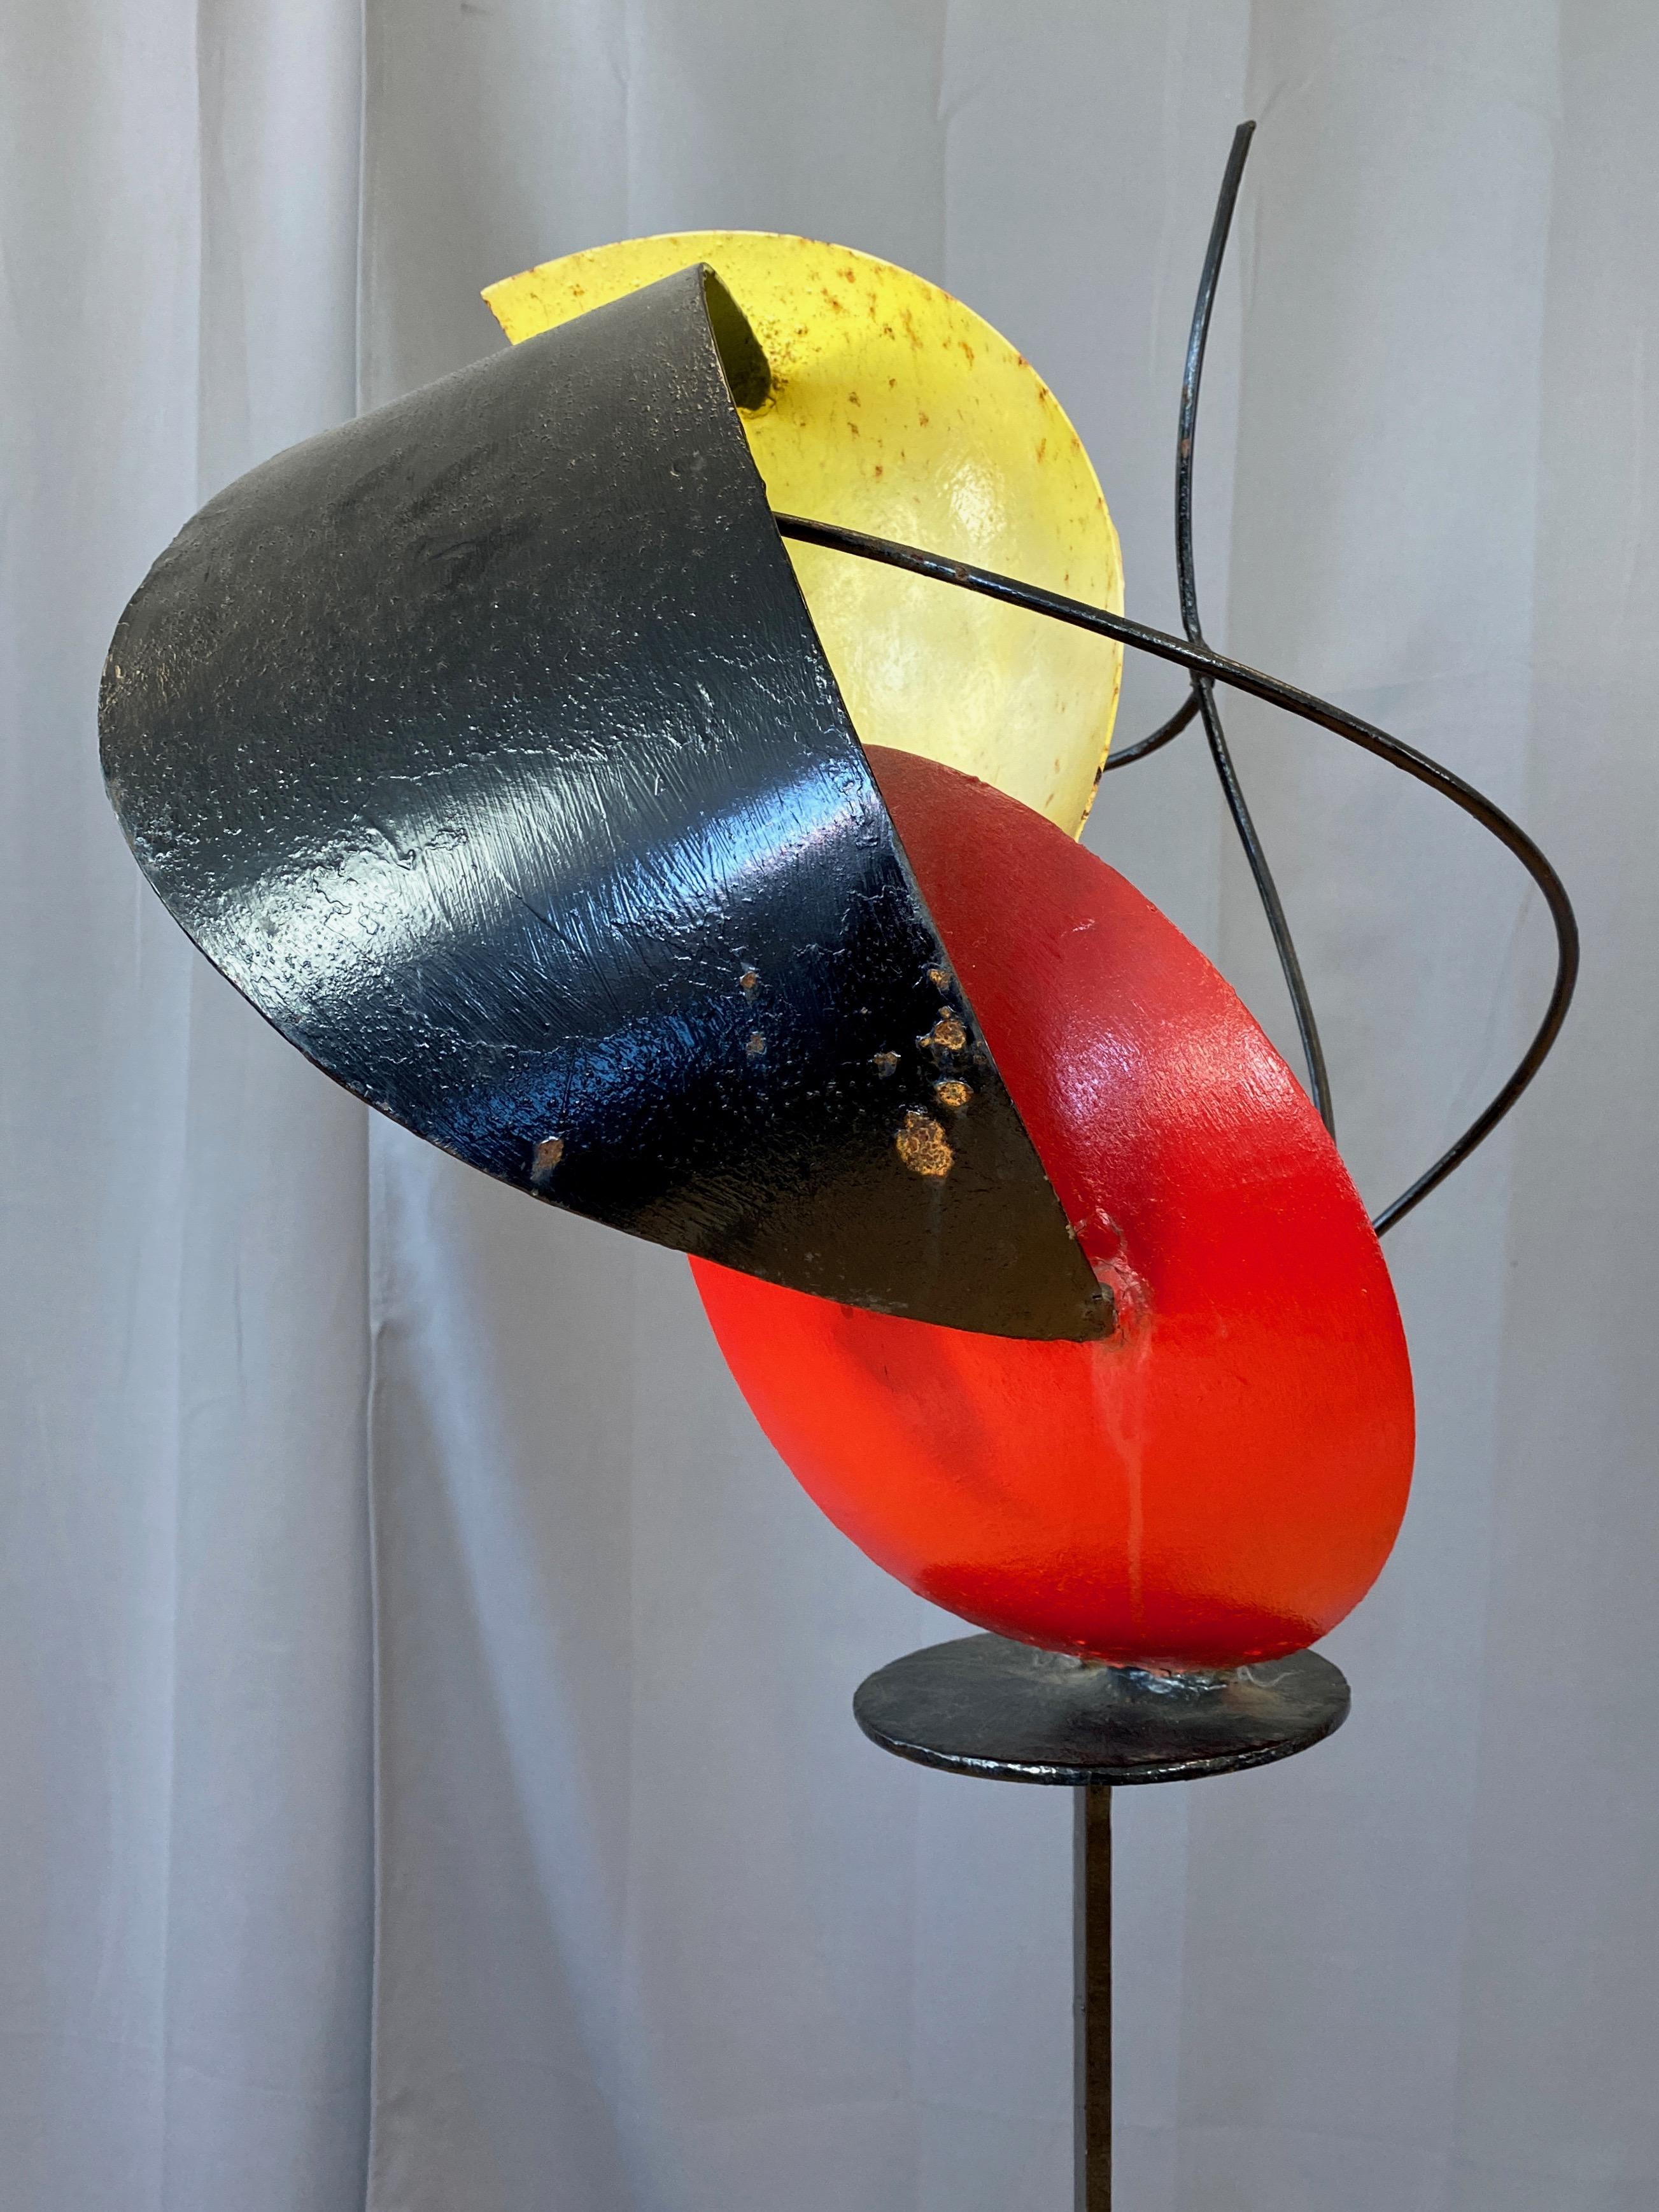 Béla Harcos Tall Abstract Expressionist Enameled Steel Sculpture, Late 1990s For Sale 3